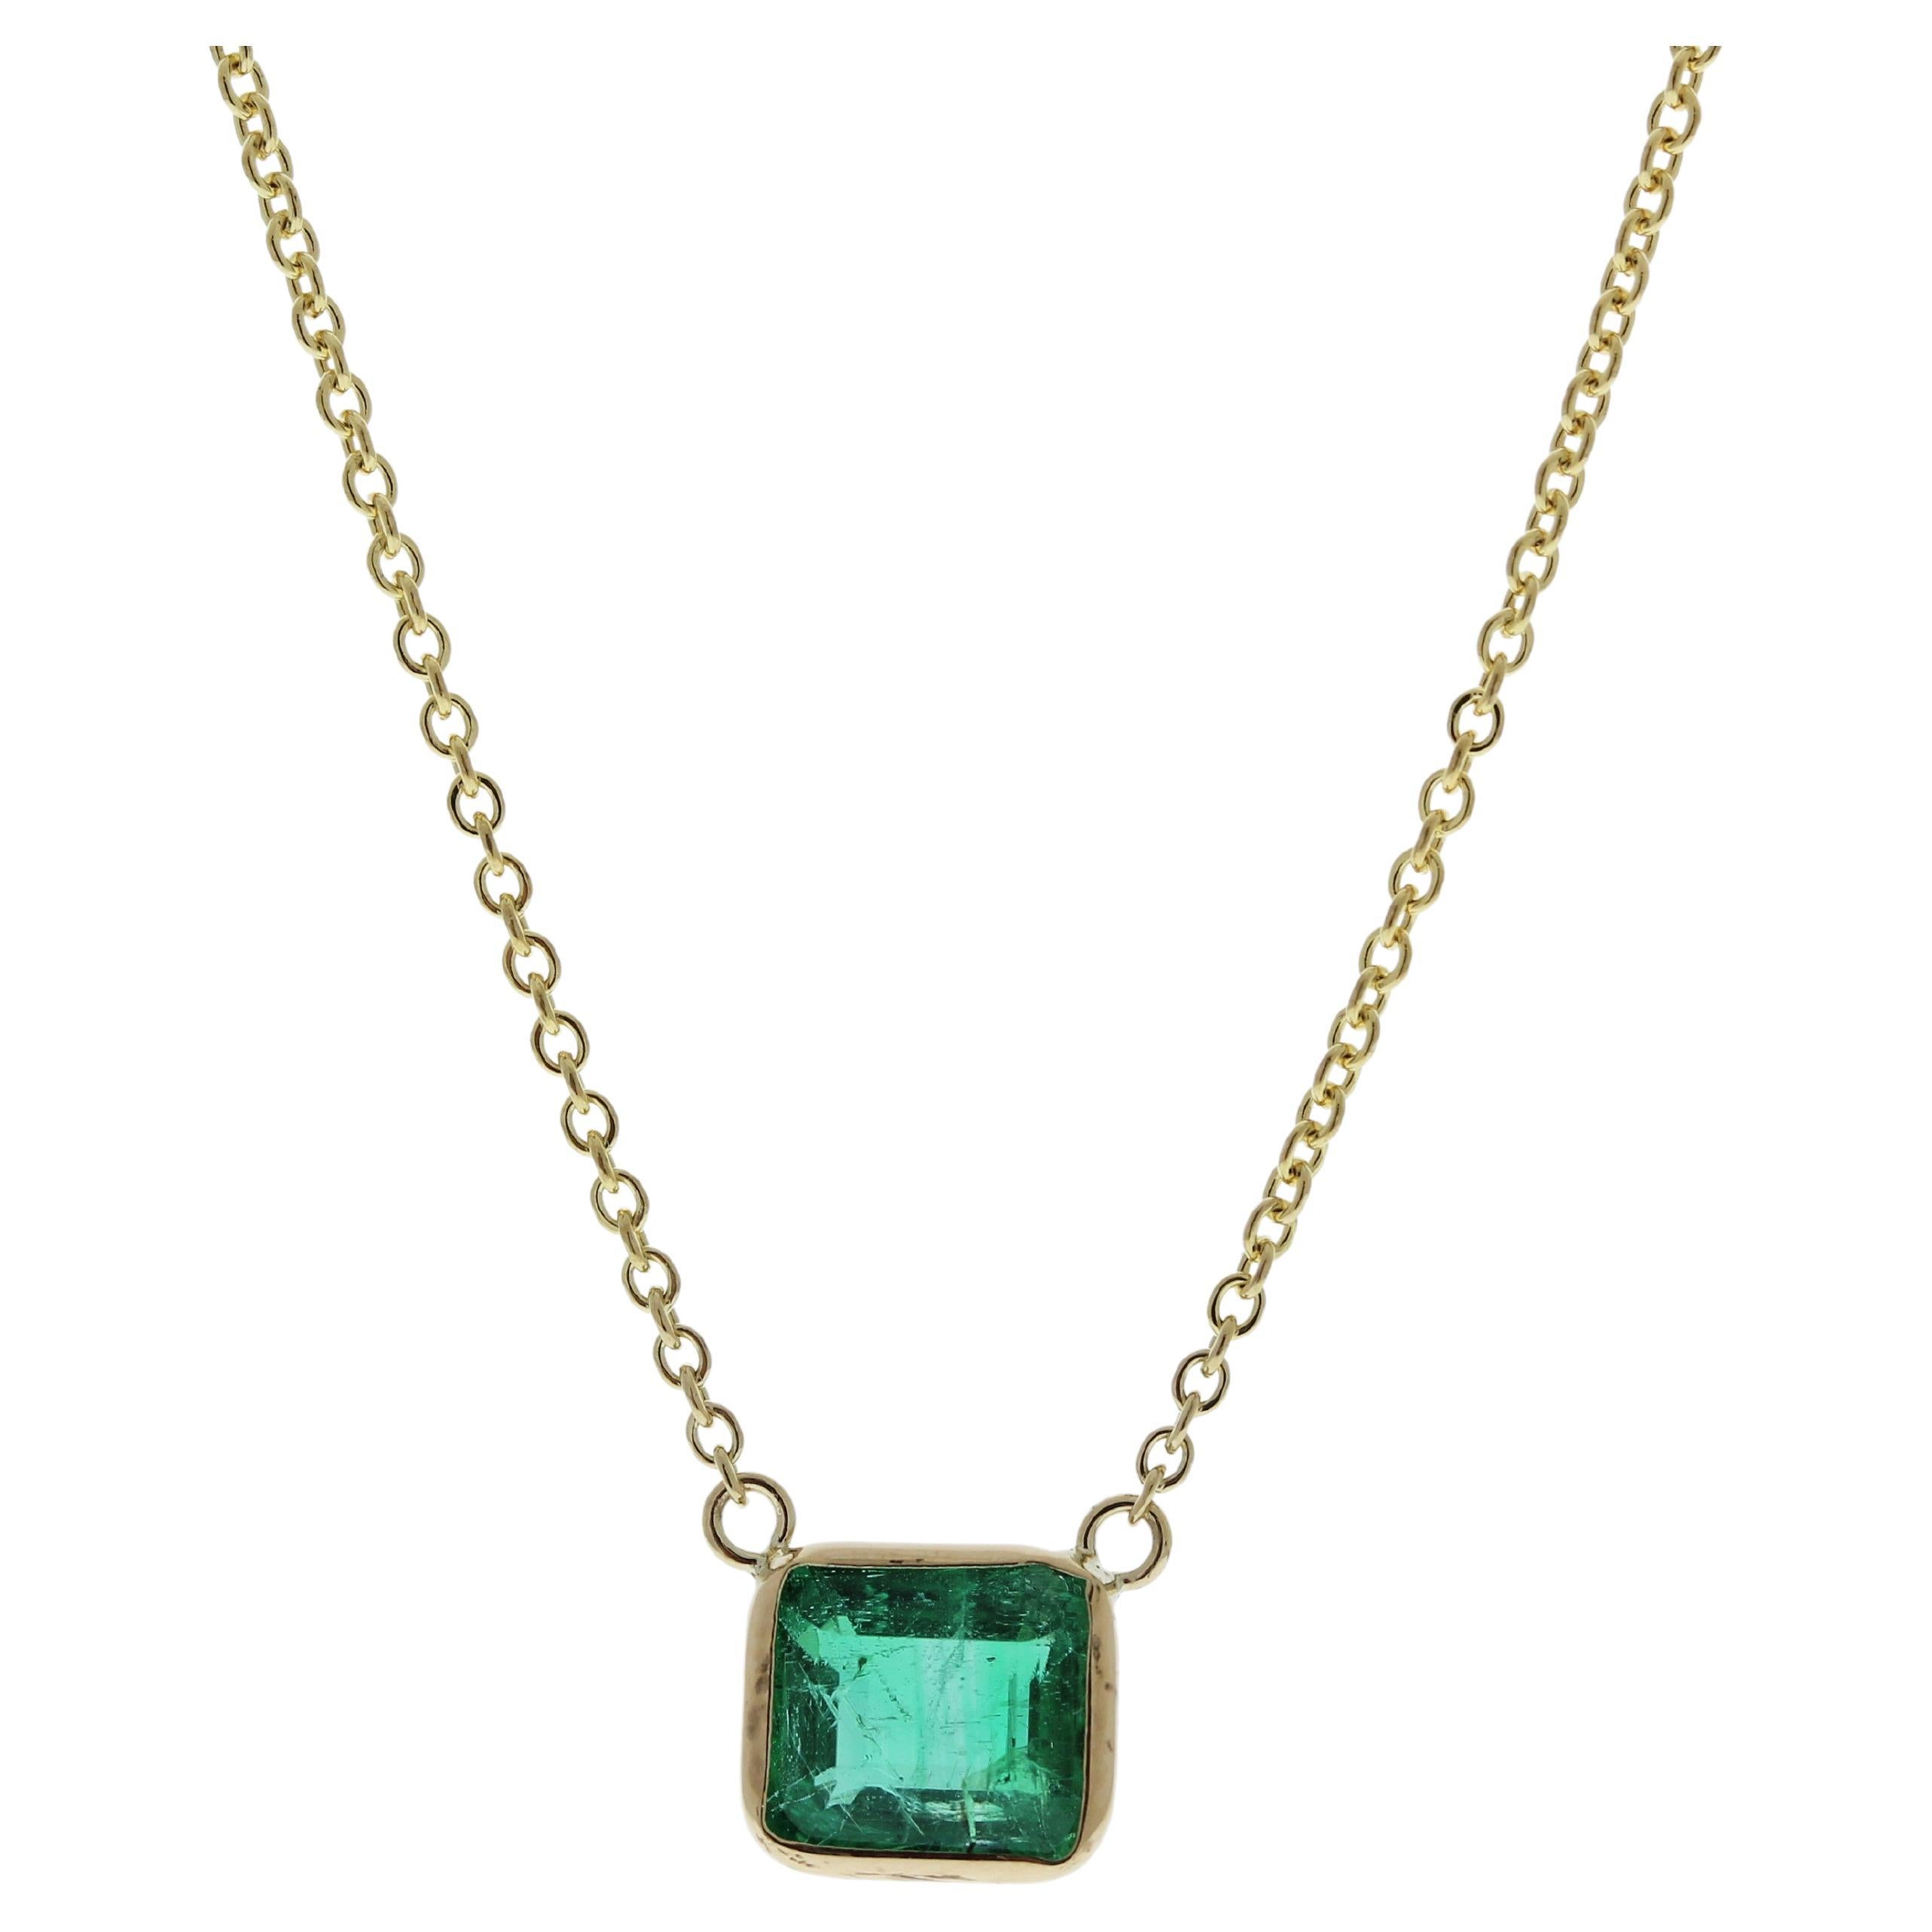 1.15 Carat Emerald Bluish Green Fashion Necklaces In 14k Yellow Gold